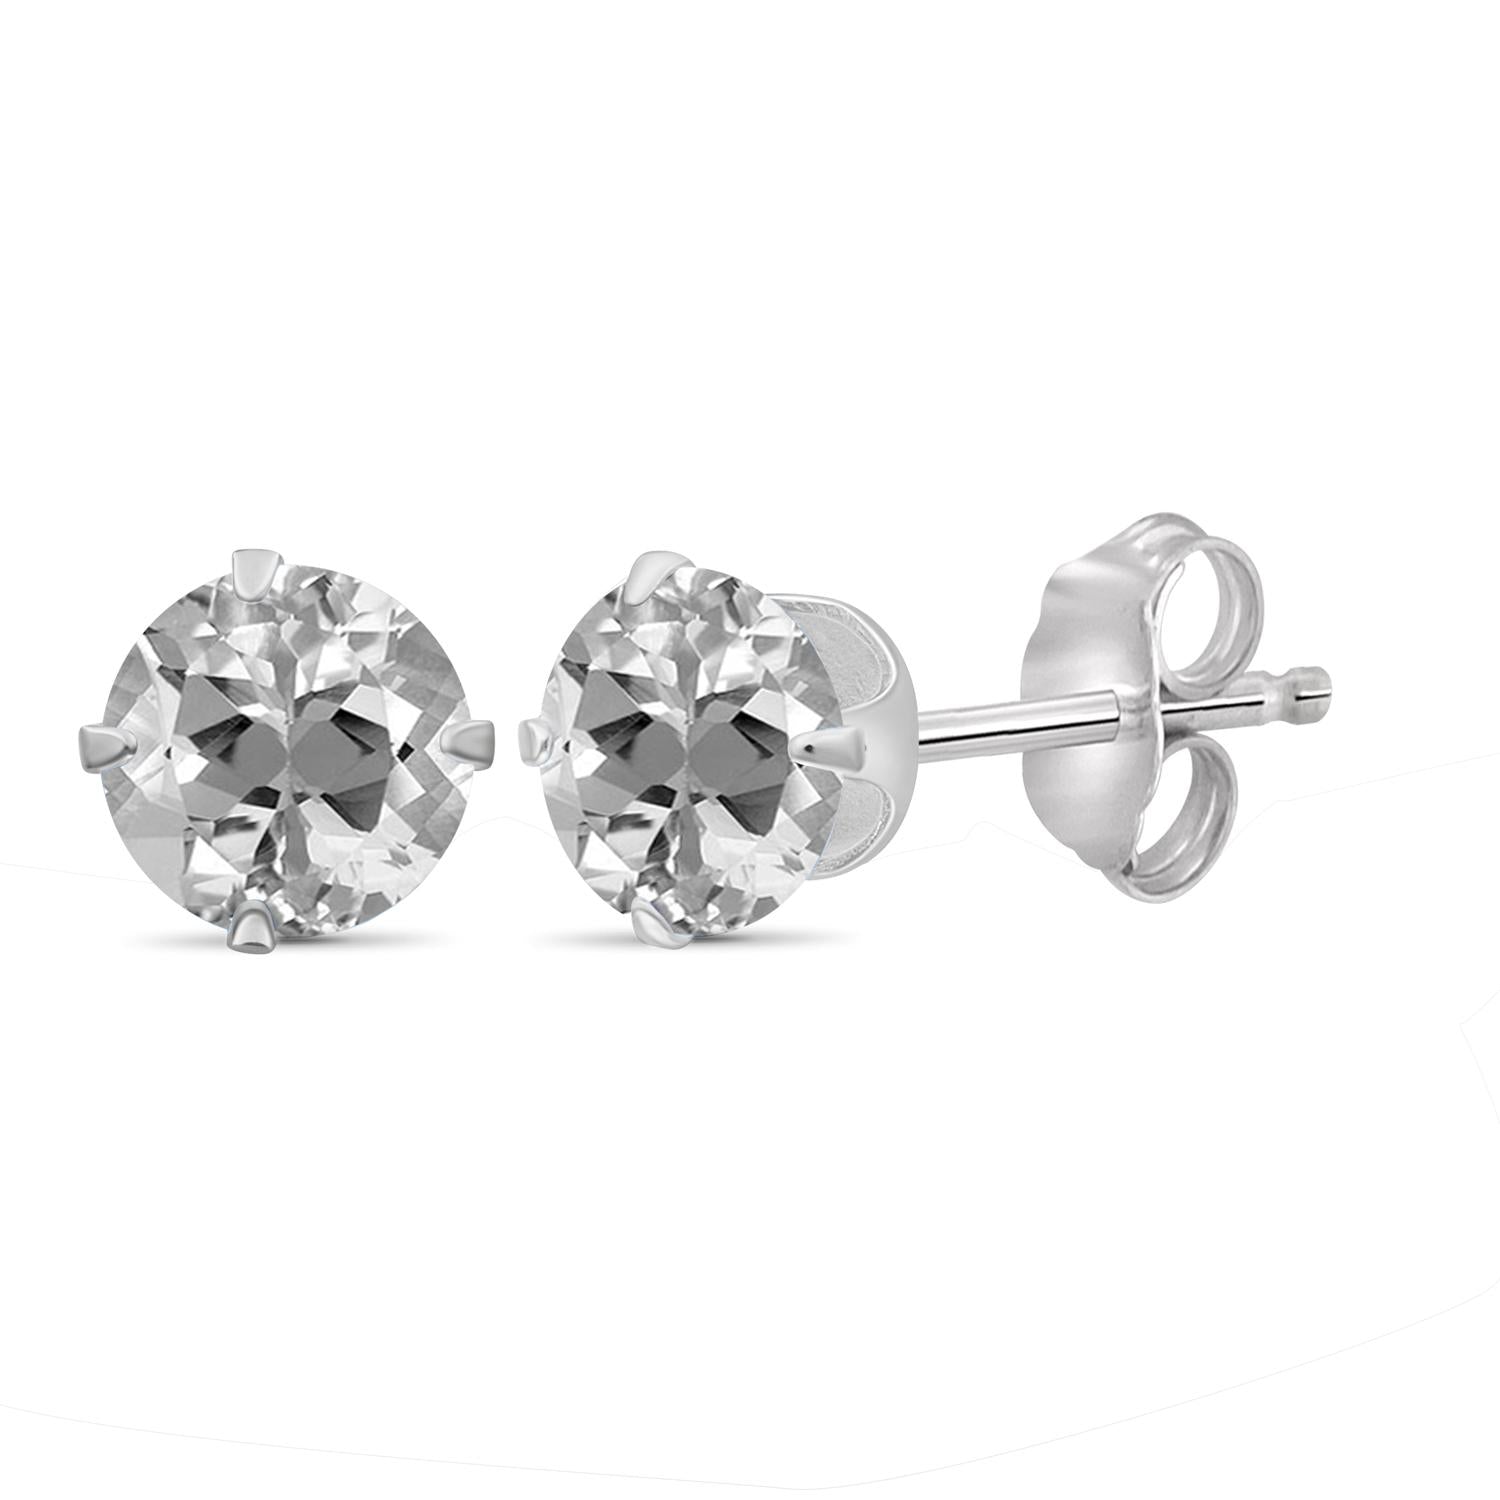 3 CTW White Topaz Stud Earrings – Sterling Silver (.925)| Hypoallergenic

Studs for Women - Round Cut Set with Push Backs